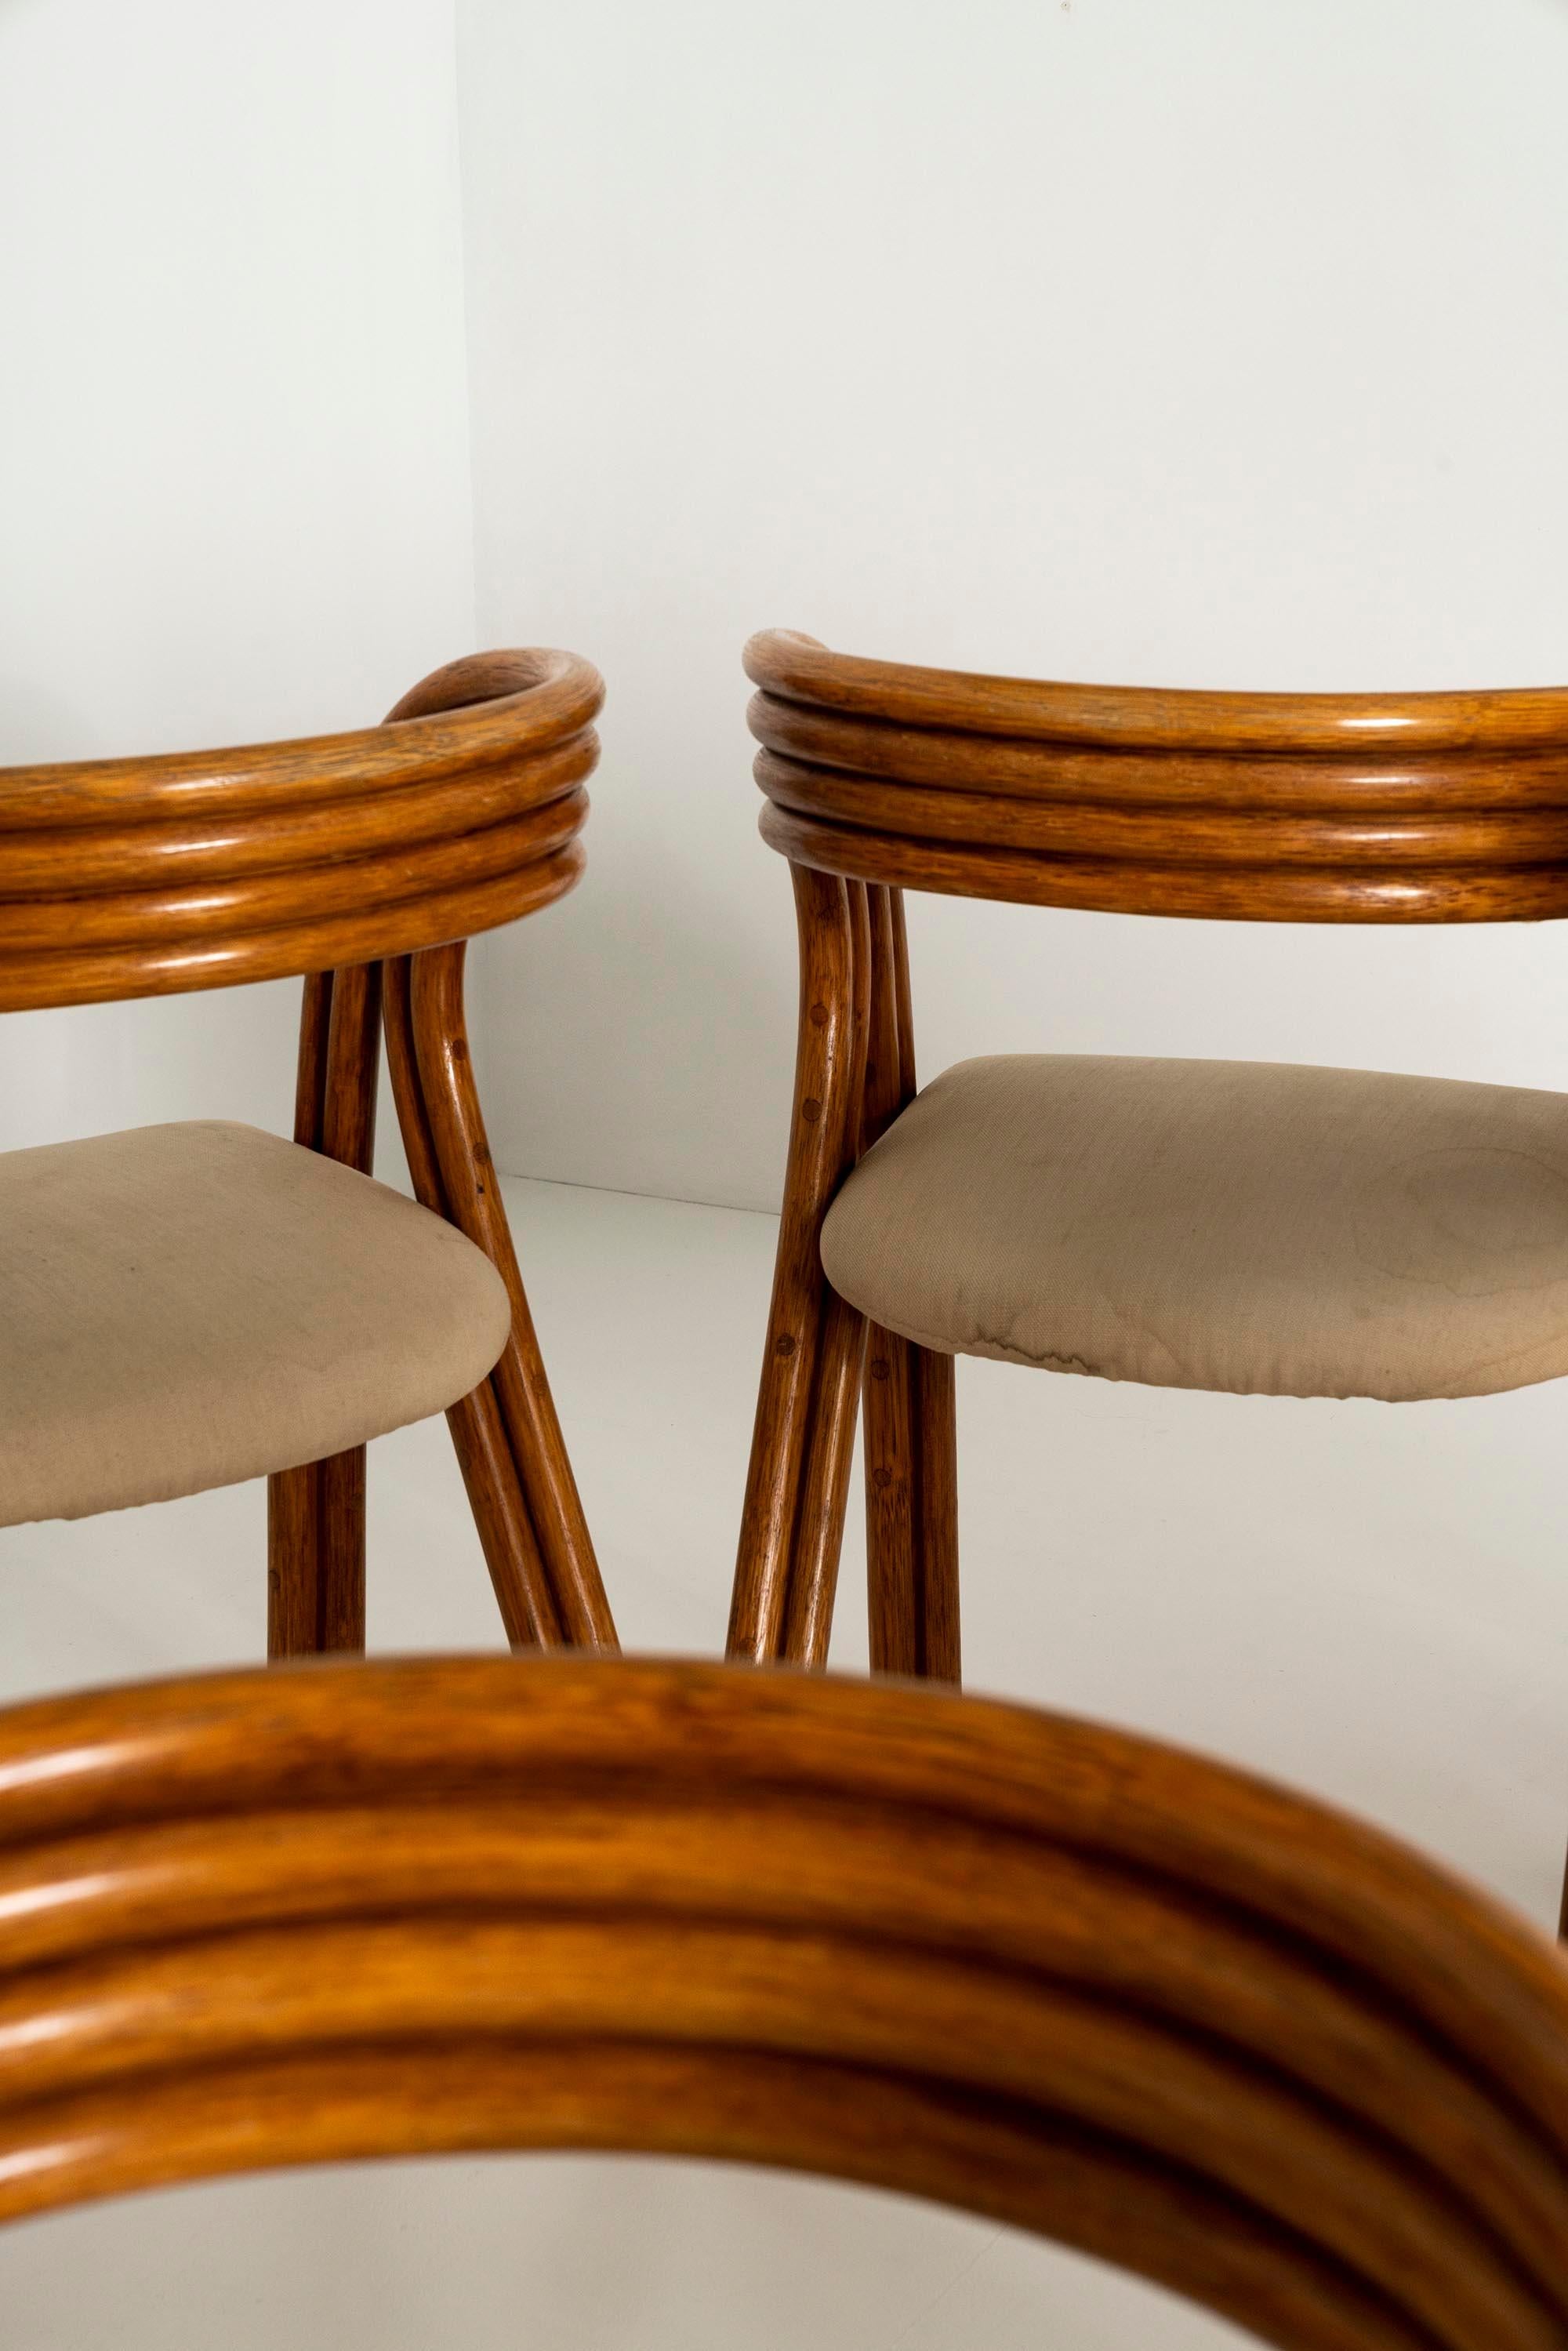 Steel 8 Dining Chairs, RD 1526, in Manou Wood by Axel Enthoven for Rohé Design, 1980s